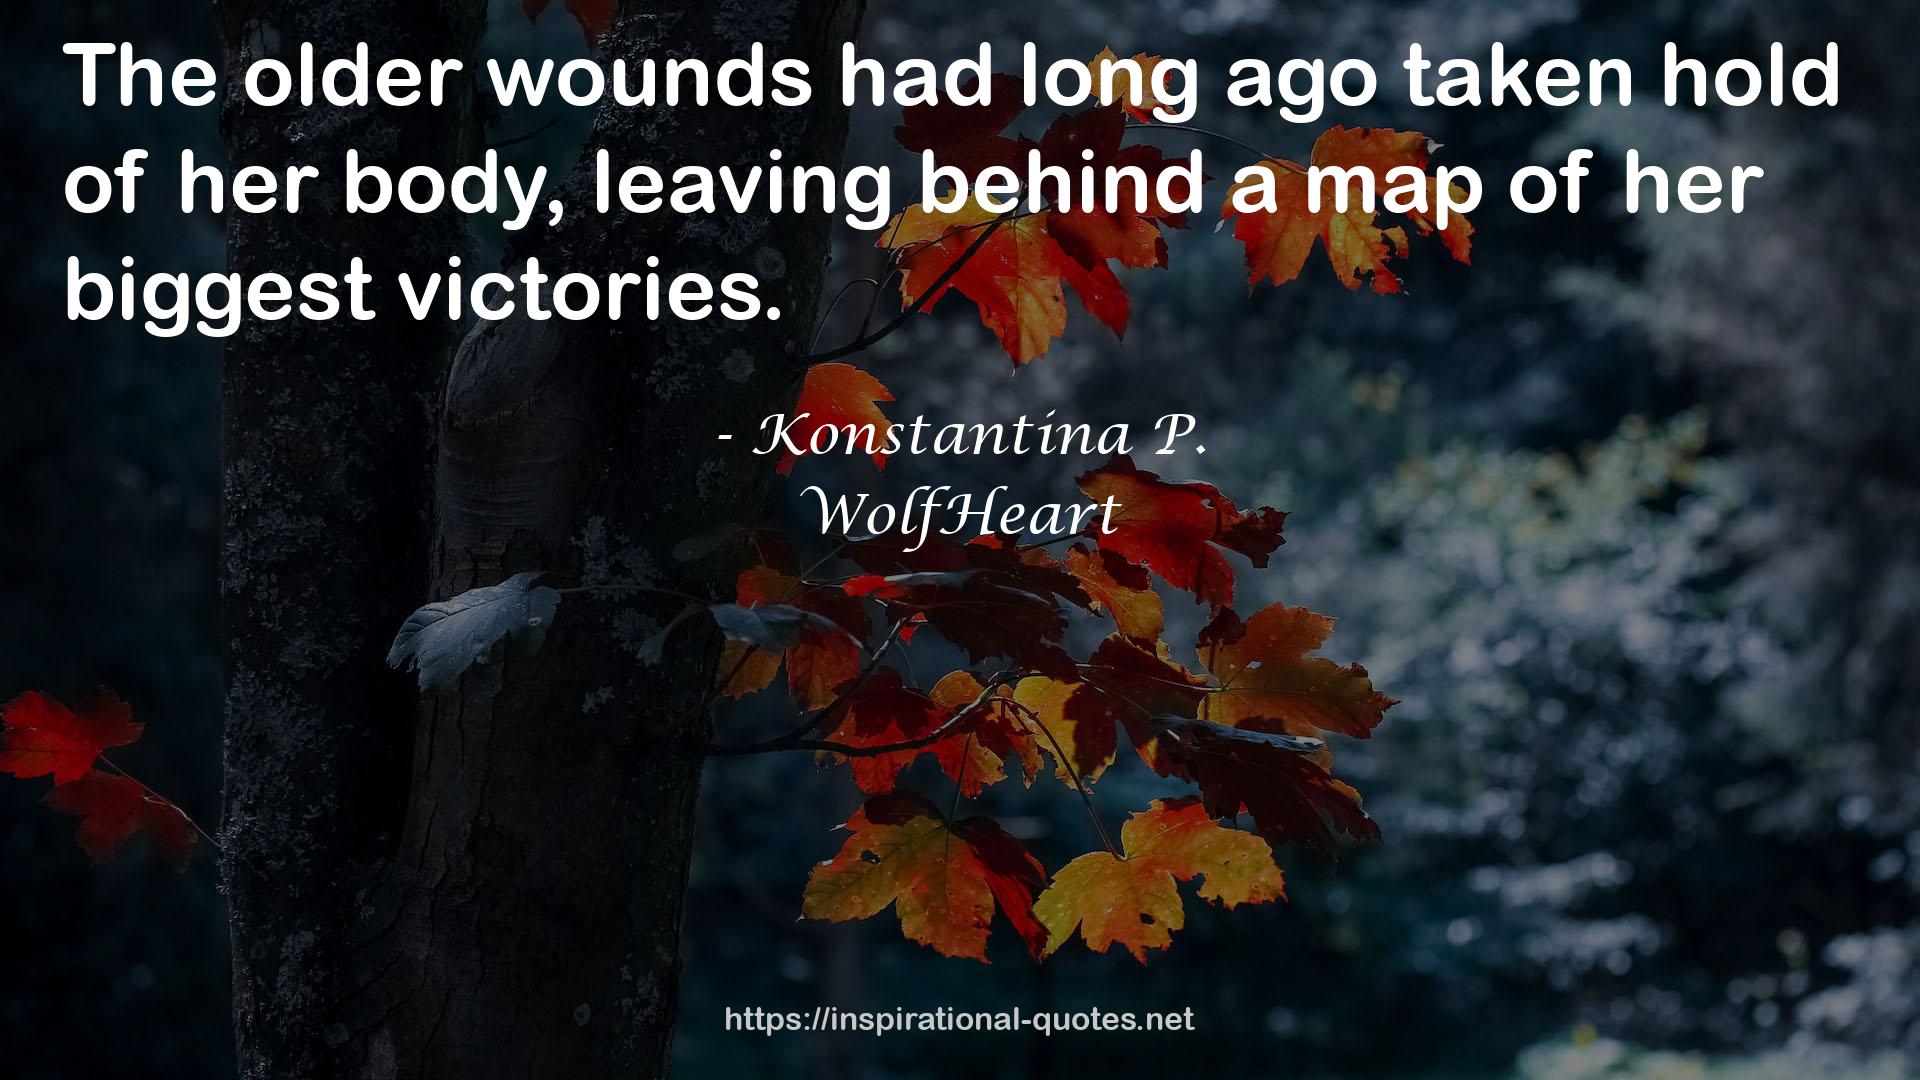 WolfHeart QUOTES